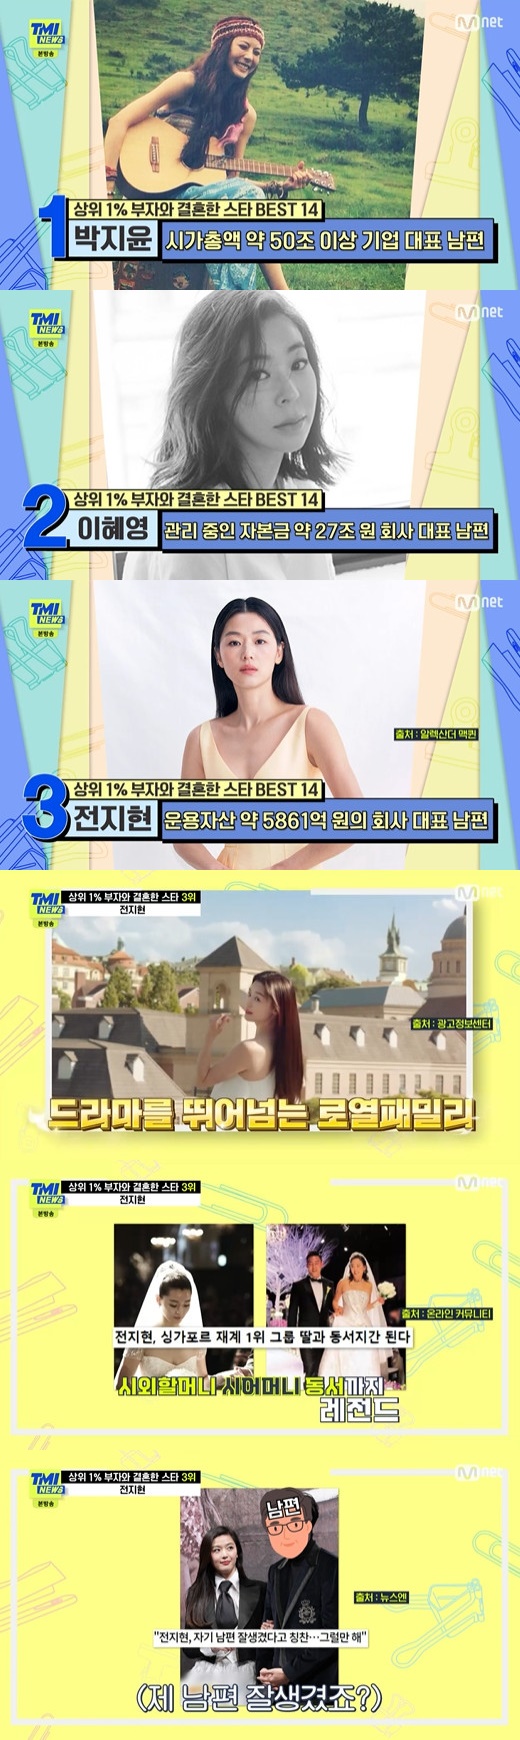 In TMI News, stars who married top 1% rich people such as actor Jun Ji-hyun, Lee Si-young and So Yoo-jin were introduced.On the cable channel Mnet TMI News broadcasted on the afternoon of the 23rd, the theme of Star Best 14 Married with the 1 percent Rich was covered.Singer Park Ji-yoon took the top spot in the long-awaited day.His husband is a K company co-founder Kim Do Hoon Cho Soo-yong, famous for his mobile messenger application, which ranked first in Koreas top invention in the 21st century.Cho Soo-yong Kim Do Hoon, a manager from Desiigner, has been in charge of designing portal sites Naver Search Window, Gwanghwamun D Tower, and Yeouido G Hotel.He was recruited as vice president of K-Company in 2016 and was appointed co-head Kim Do Hoon in 2018; last year, the amount of money included in bonuses was 3,475 million One.K companys A Year Ago in Winter sales are 4 trillion won and market capitalization is 54 trillion won.Second place is talent Lee Hye-young, who is a member of the founding member of the domestic private equity fund M. M is one of the largest private equity funds in Asia, with the funds under management of about 27 trillion One.Third was Jun Ji-hyun, the mother of two sons, nine years into their marriage.Jun Ji-hyun himself owns about 87 billion One worth of buildings for 100 million One per episode, but her husband Choi Jun-hyuk family is also a legend.Choi Jun-hyuk, a husband who boasts a similar appearance to actor Jang Dong-gun and So Ji-seop, was awarded a 70% stake in the company A Asset Management Vice President established by his father after graduating from prestigious K University and was appointed Kim Do Hoon.The companys operating assets are about 586.1 billion One.In addition, Jun Ji-hyuns grandmother is the late Lee Young-hee Hanbok Desiigner, and her mother-in-law Lee Jung-woo is also a Desiigner from prestigious universities.Jun Ji-hyuns husband, Choi Jun-ho, is from Group X-Raji and is currently managing director of ASEANs largest stock exchange.In particular, Choi Jun-ho married the only daughter of H group in Singapore.Park Chan-ho, who married Park Ri-hye, the daughter of a real estate representative family with a market capitalization of about 400 billion won, and Sooo-jin, who married Baek Jong One, the representative of the company with annual sales of about 120 billion won, and Cho Soo-ae, who married Park Seo-ae, Park Shin-yang, who married her daughter Baek Hye-jin, and Hong Jin-kyung, who married Kim Jung-woo, the son of the family of about 18.9 billion won, and Su-hyun, who married Cha Min-keun, the representative of the 9.1 billion won investment attraction company, and Clara, who married Samuel Hwang, a businessman with about 8.1 billion won Han Chae-young, who married Choi Dong-joon, and Kim Jae-yeon, who married Park Seo-yeon, an agency representative of about 2.4 billion won in annual sales, were named.12th place is Lee Si-young; his husband, who wed in 2017, is Cho Seong-hyun, a restaurant businessman called Little Baekjong One.Cho Seong-hyun succeeded in the roof top bar, Hanwoo meat specialty store, Lee Si-young regular pork restaurant located in Cheongdam-dong, Gangnam-gu, Seoul.The annual sales of the restaurant business he represents are 2.5 billion One.In particular, Lee Si-young and Cho Seong-hyun earned about 4 billion 75 million won in two buildings in four years.The 14th place is Choo Ja-hyun, who has been with Woo Hyo-kwang for about a hundred years. The two men have been in a relationship with each other in the Chinese drama in 2012.He was later reunited in 2015 in his work, and officially announced he was a lover; he first reported his marriage in 2017 and then married in 2019.Woo Hyo-kwangs father is a huge financial figure as chairman of China Small and Medium Business. Woo Hyo-kwang himself is also more than 100 million won per drama.In particular, Woo Hyo-kwang Choo Ja-hyun bought the Seoul Yongsan luxury villa for 6.3 billion One, and set up a honeymoon home where the CCTV building, the symbol of China Beijing, is visible.The price of this house is about 9 billion One based on A Year Ago in Winter.